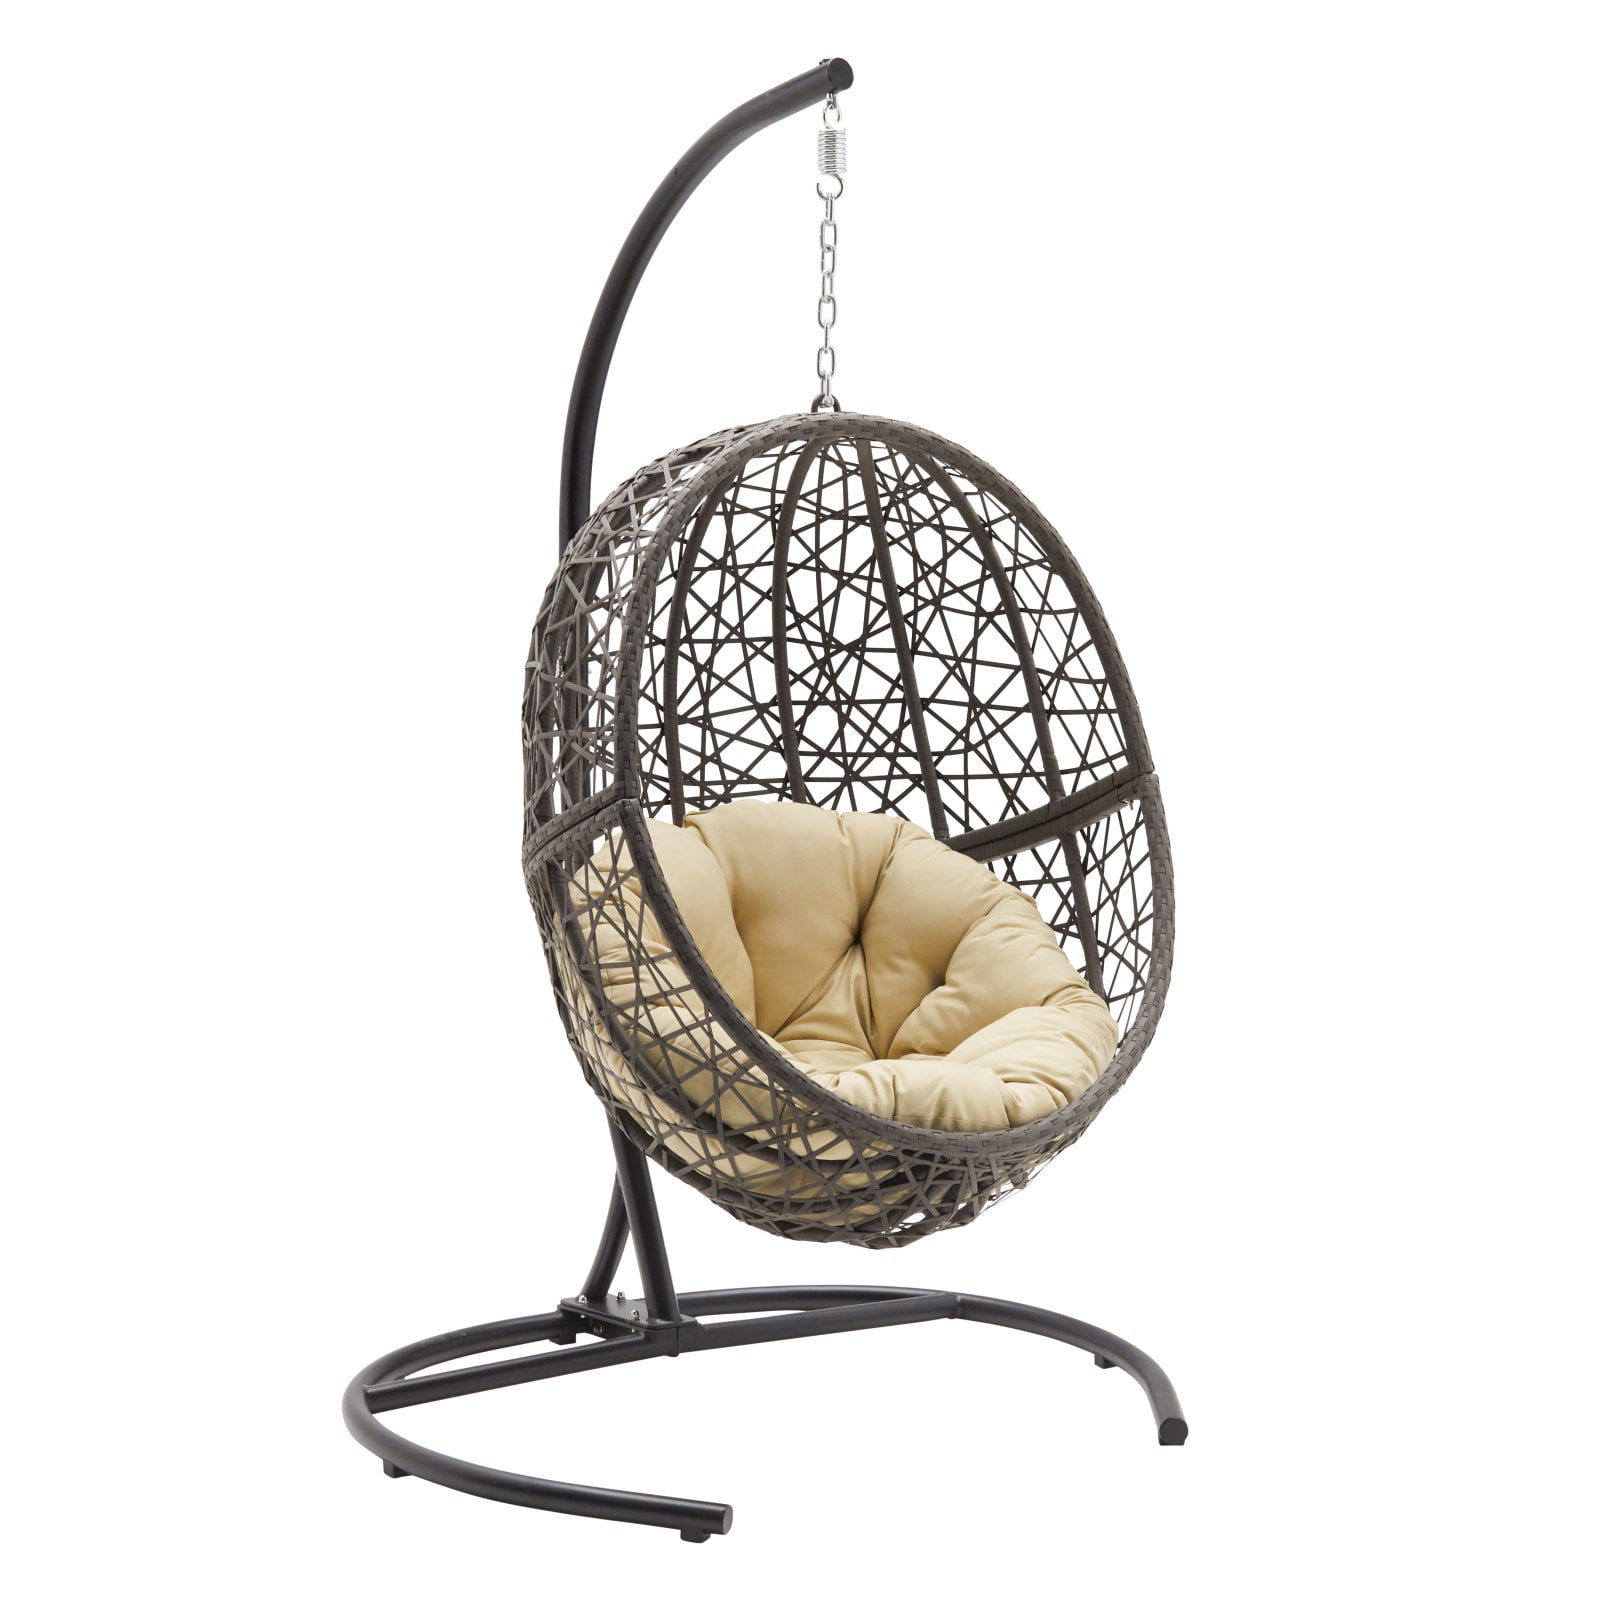 Egg Chair Swing On Sale